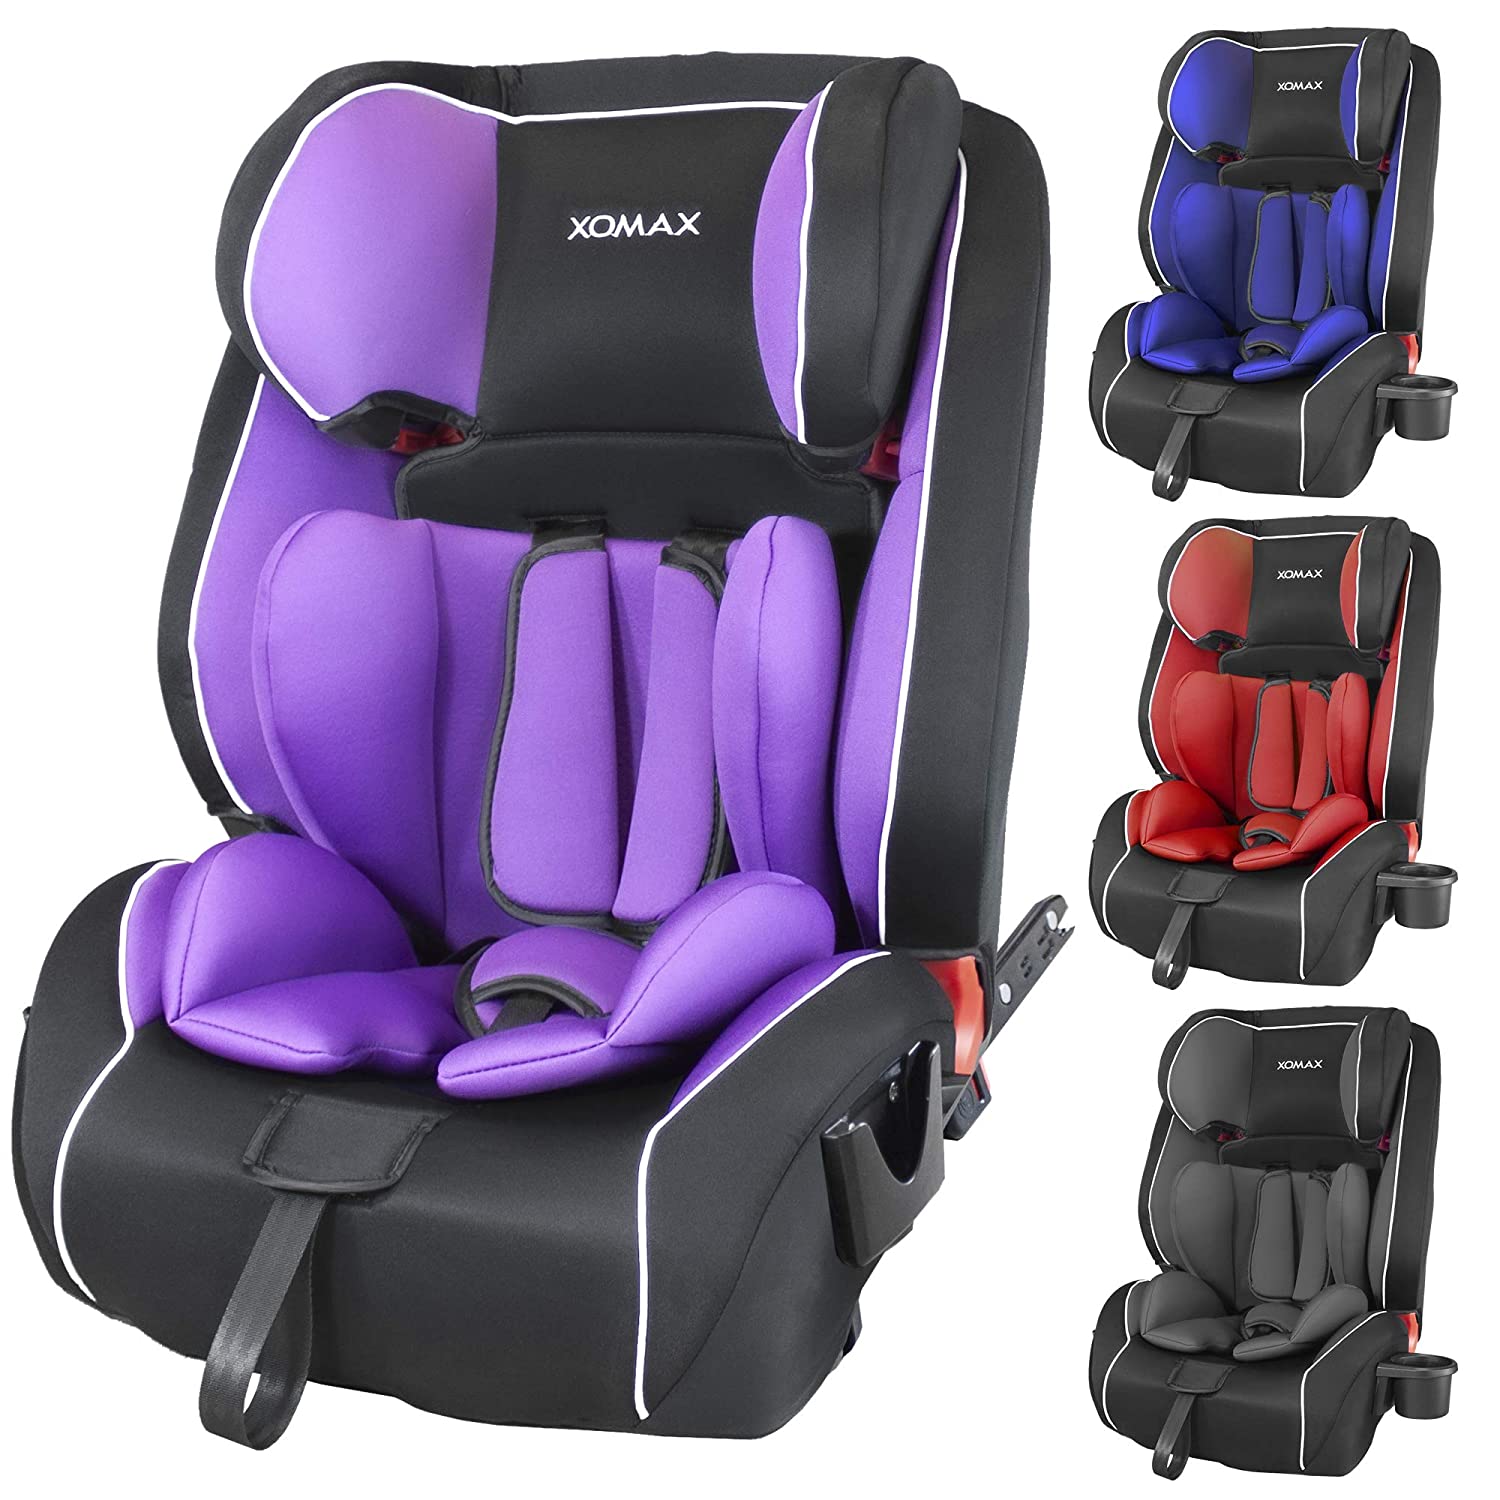 Xomax HQ668 Isofix Child Car Seat, 9 - 36 kg with Bottle Holder, Grows with Your Child: 1 - 12 Years, Group 1 / 2 / 3, 5-Point Harness and 3-Point Harness, Removable and Washable Cover, ECE R44/04 Purple